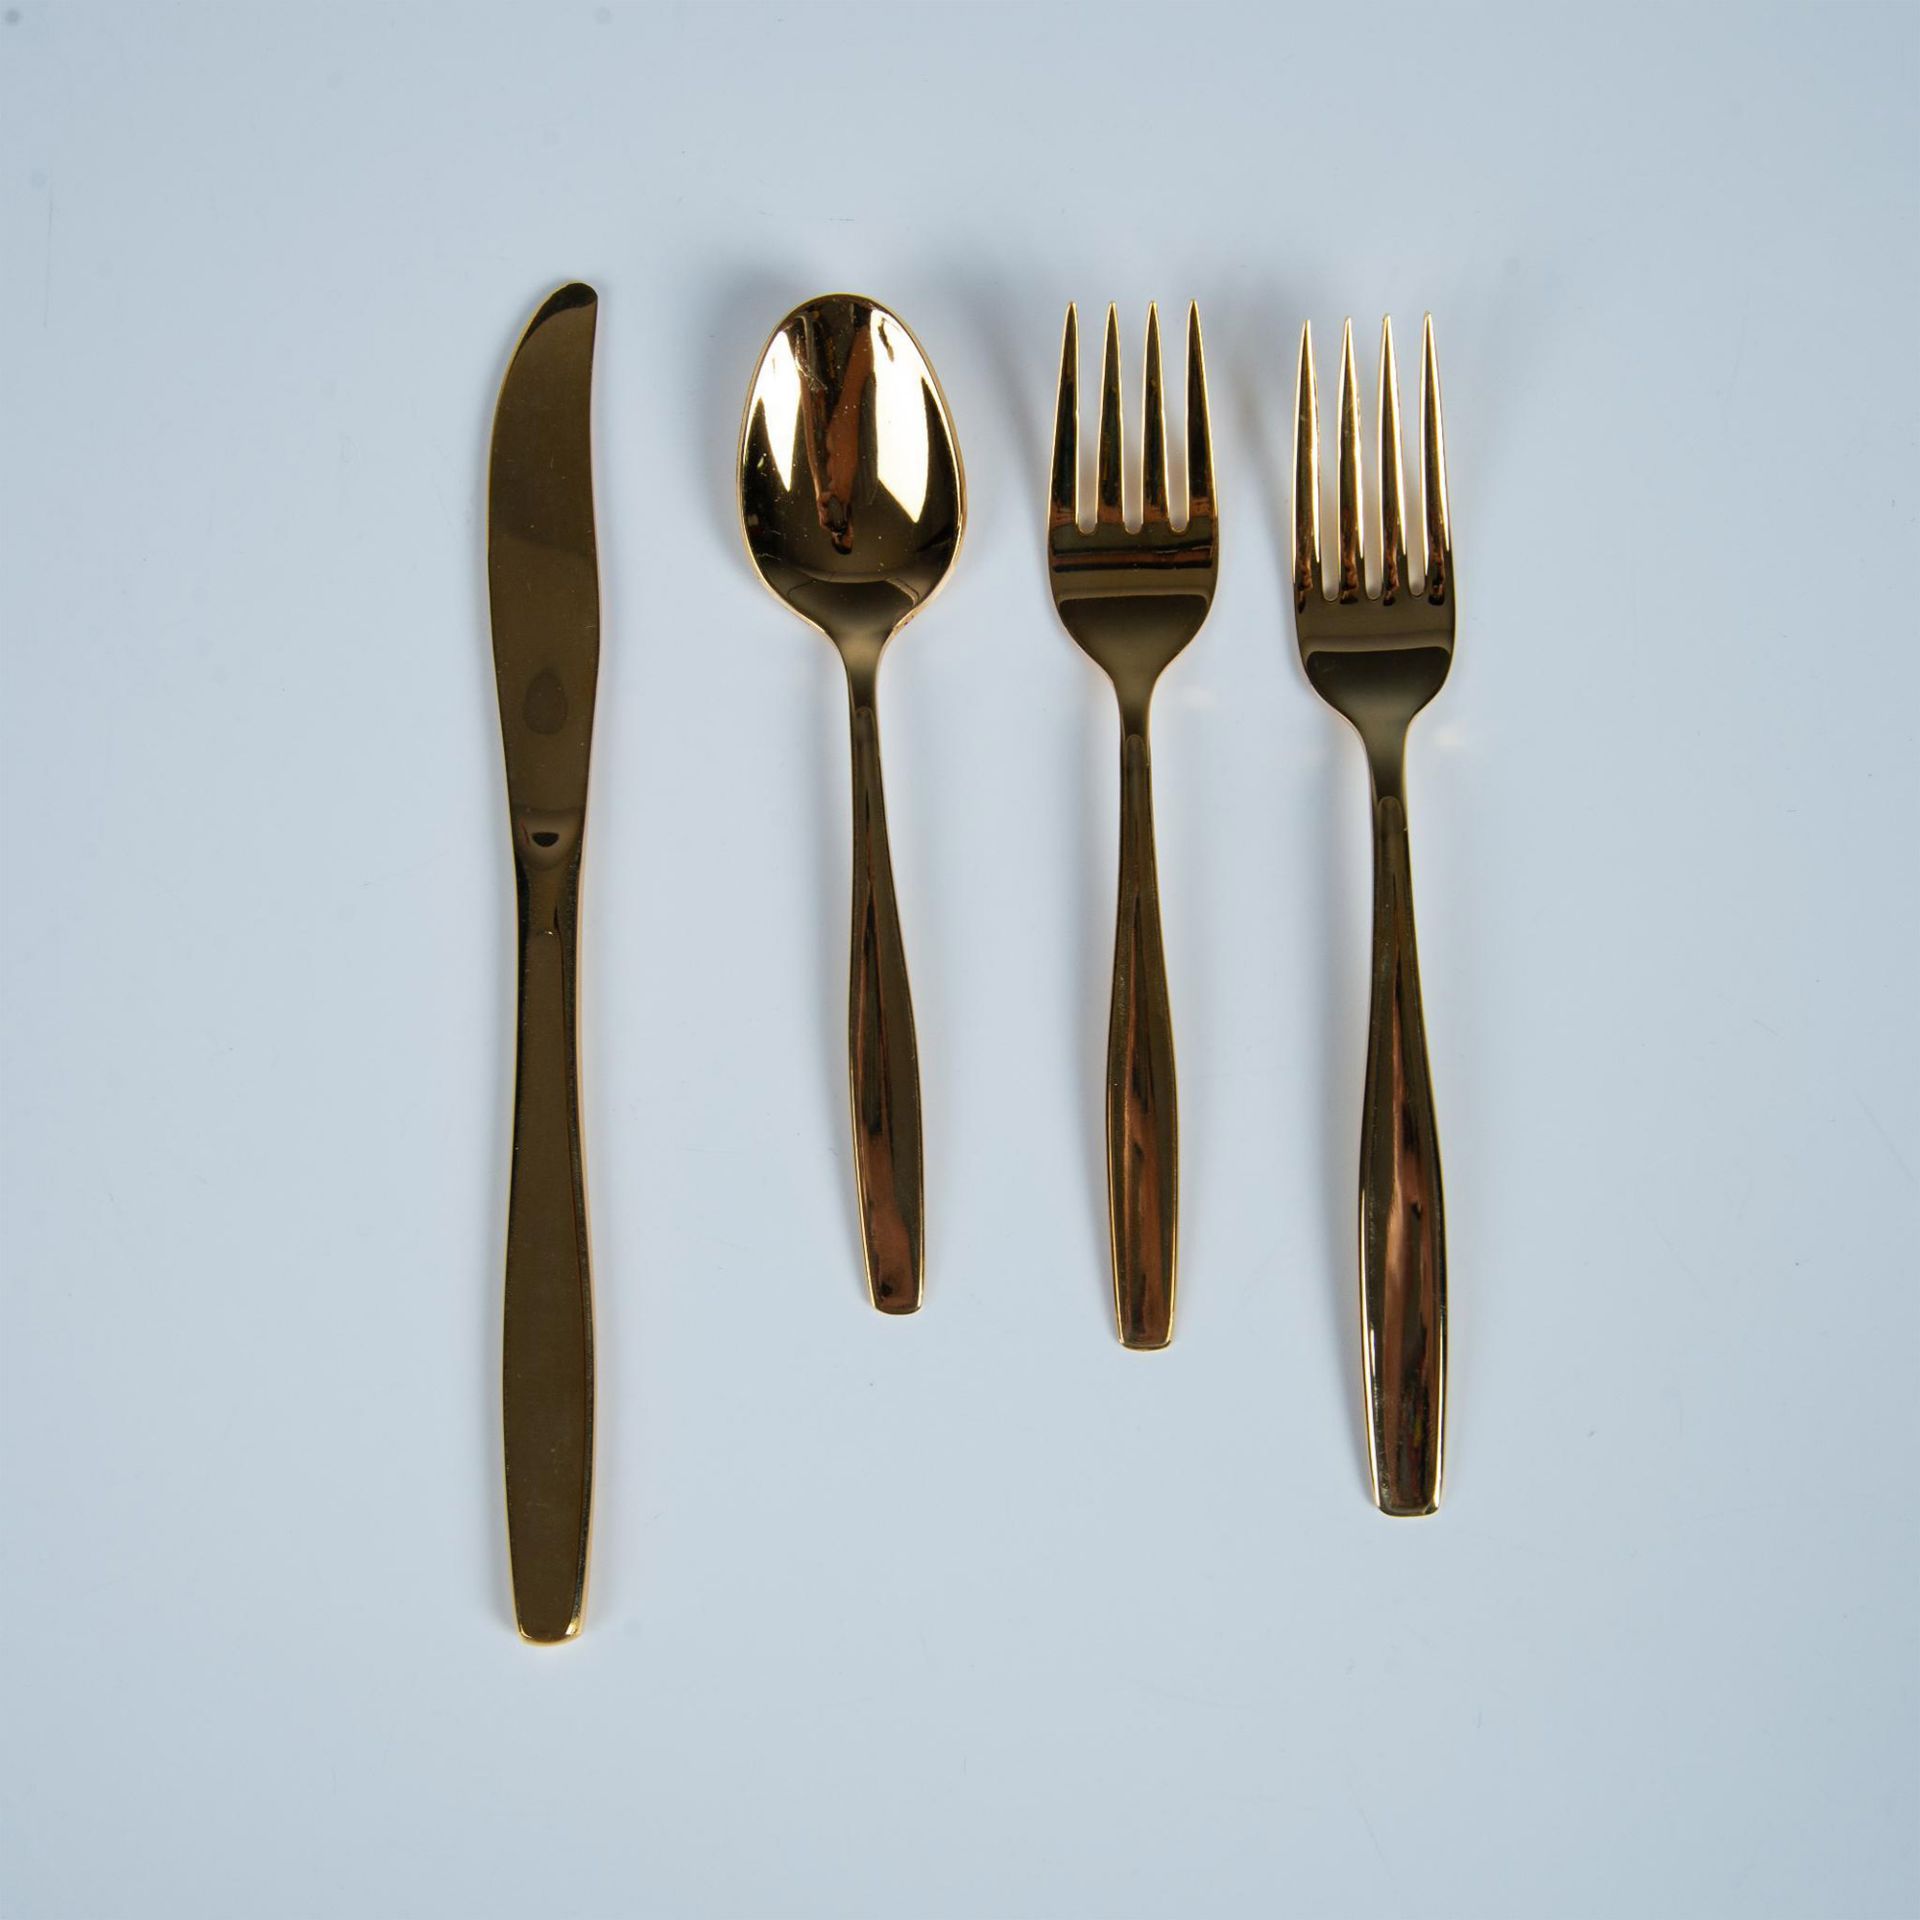 4pc Rogers Cutlery 24K Gold Plated Stainless Steel Flatware - Image 4 of 8